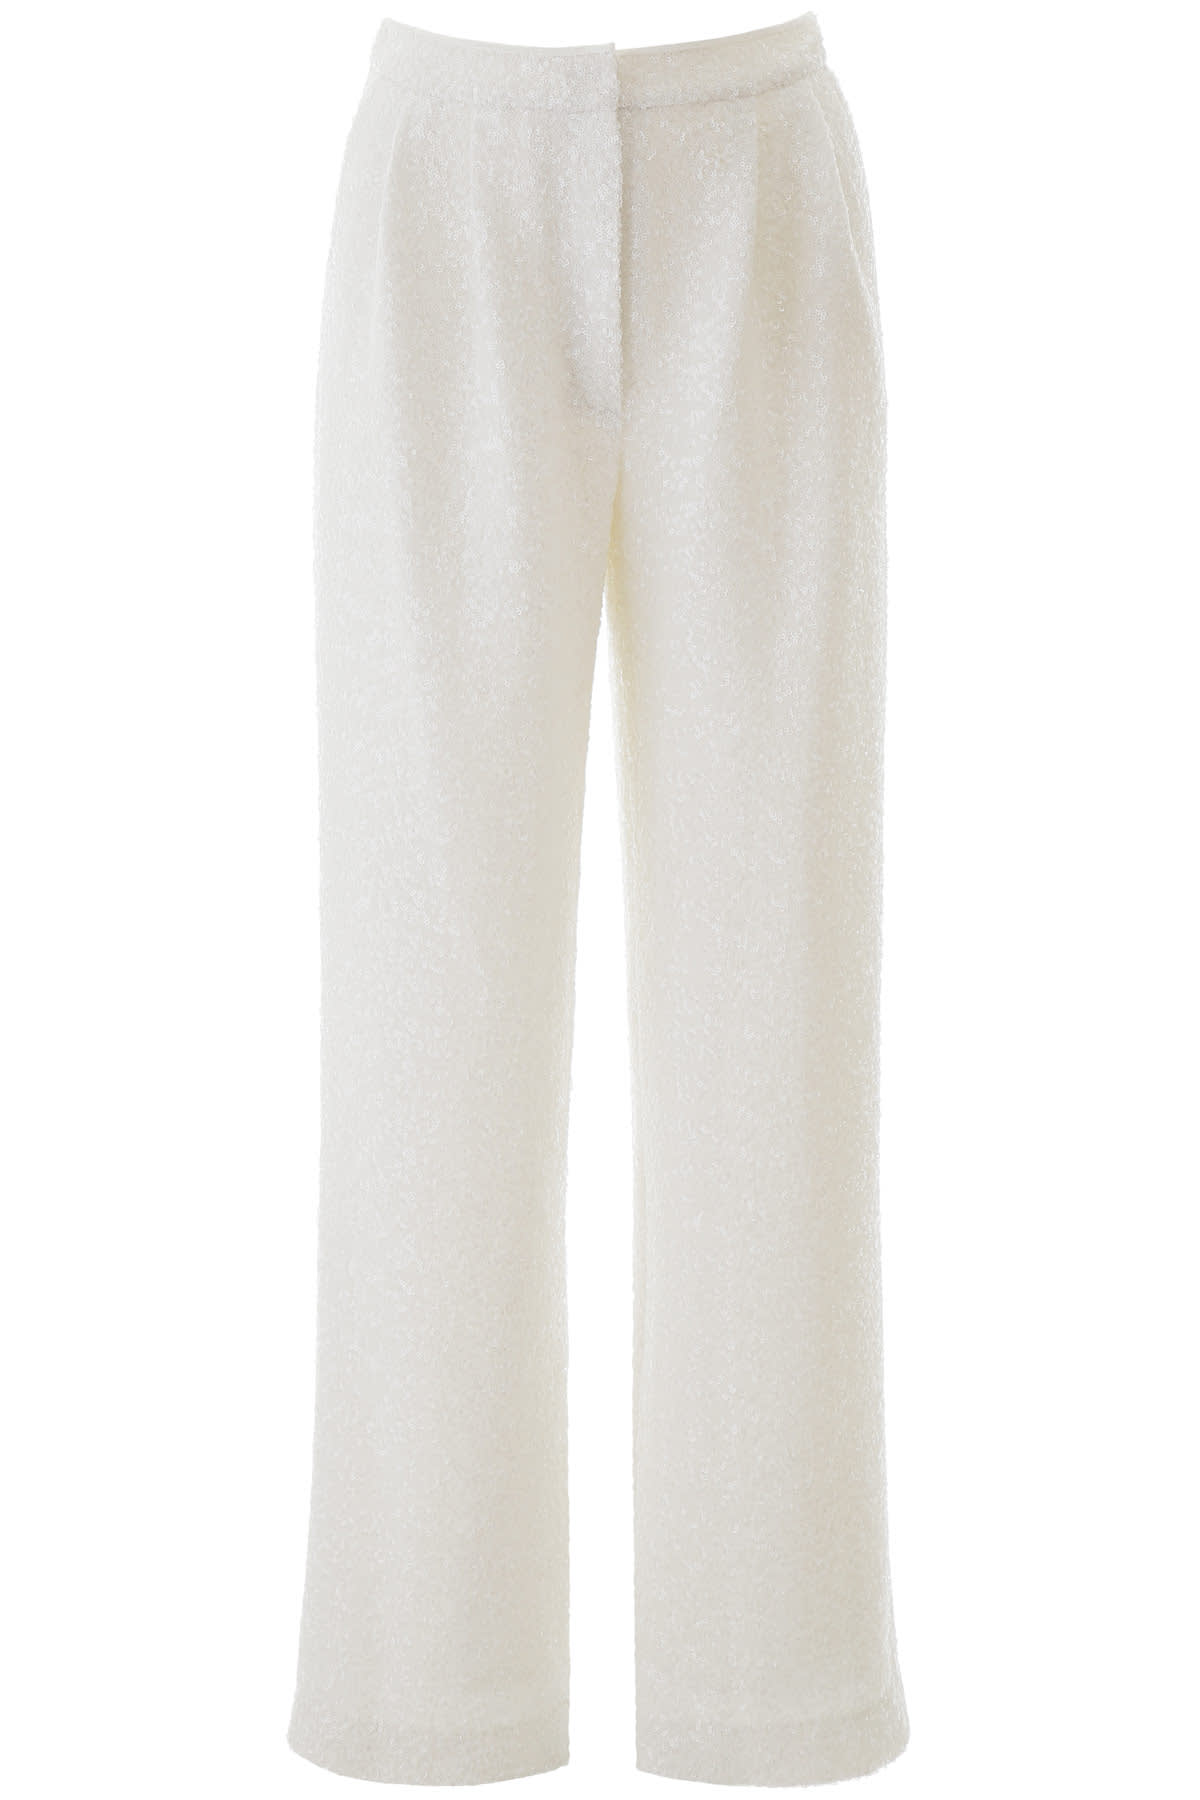 IN THE MOOD FOR LOVE SEQUINED PALAZZO PANTS,RIRI PANT WHITE